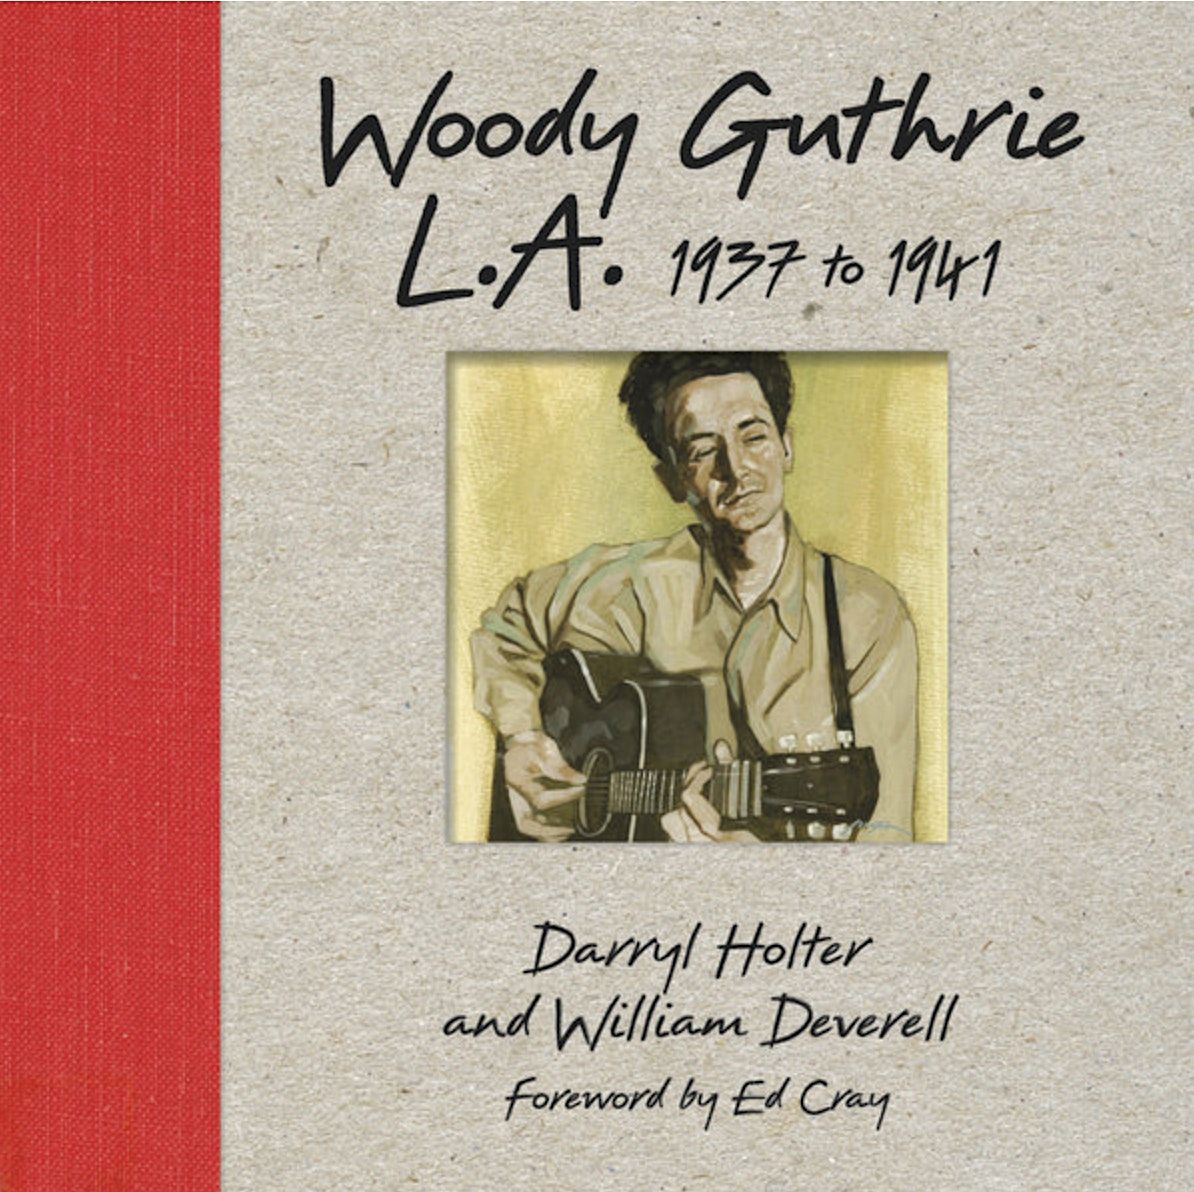 Angel City Press Authors' Stage - Woody Guthrie L.A.